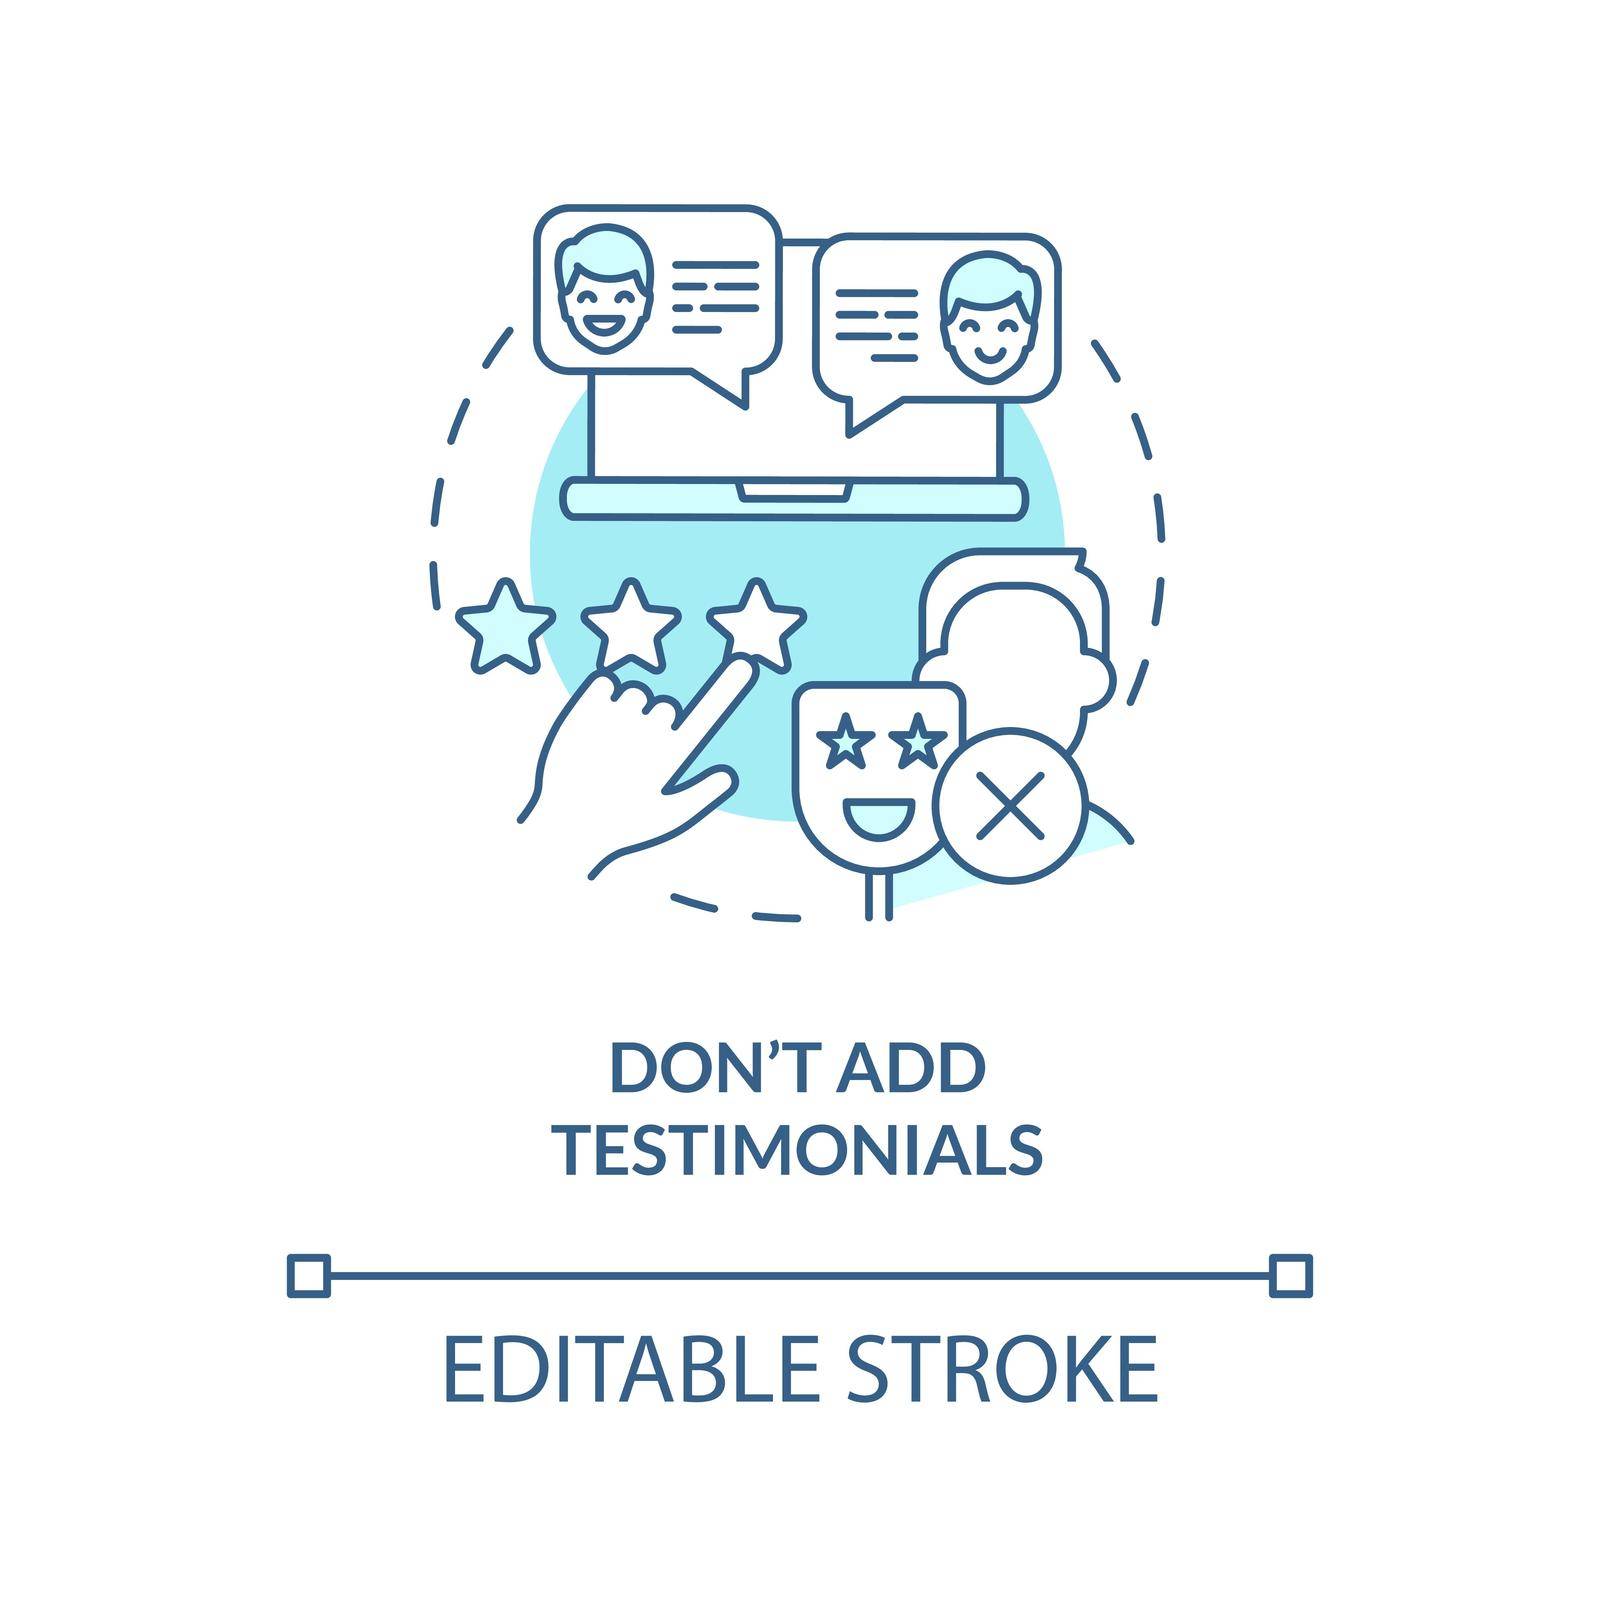 Dont add testimonials turquoise concept icon by bsd